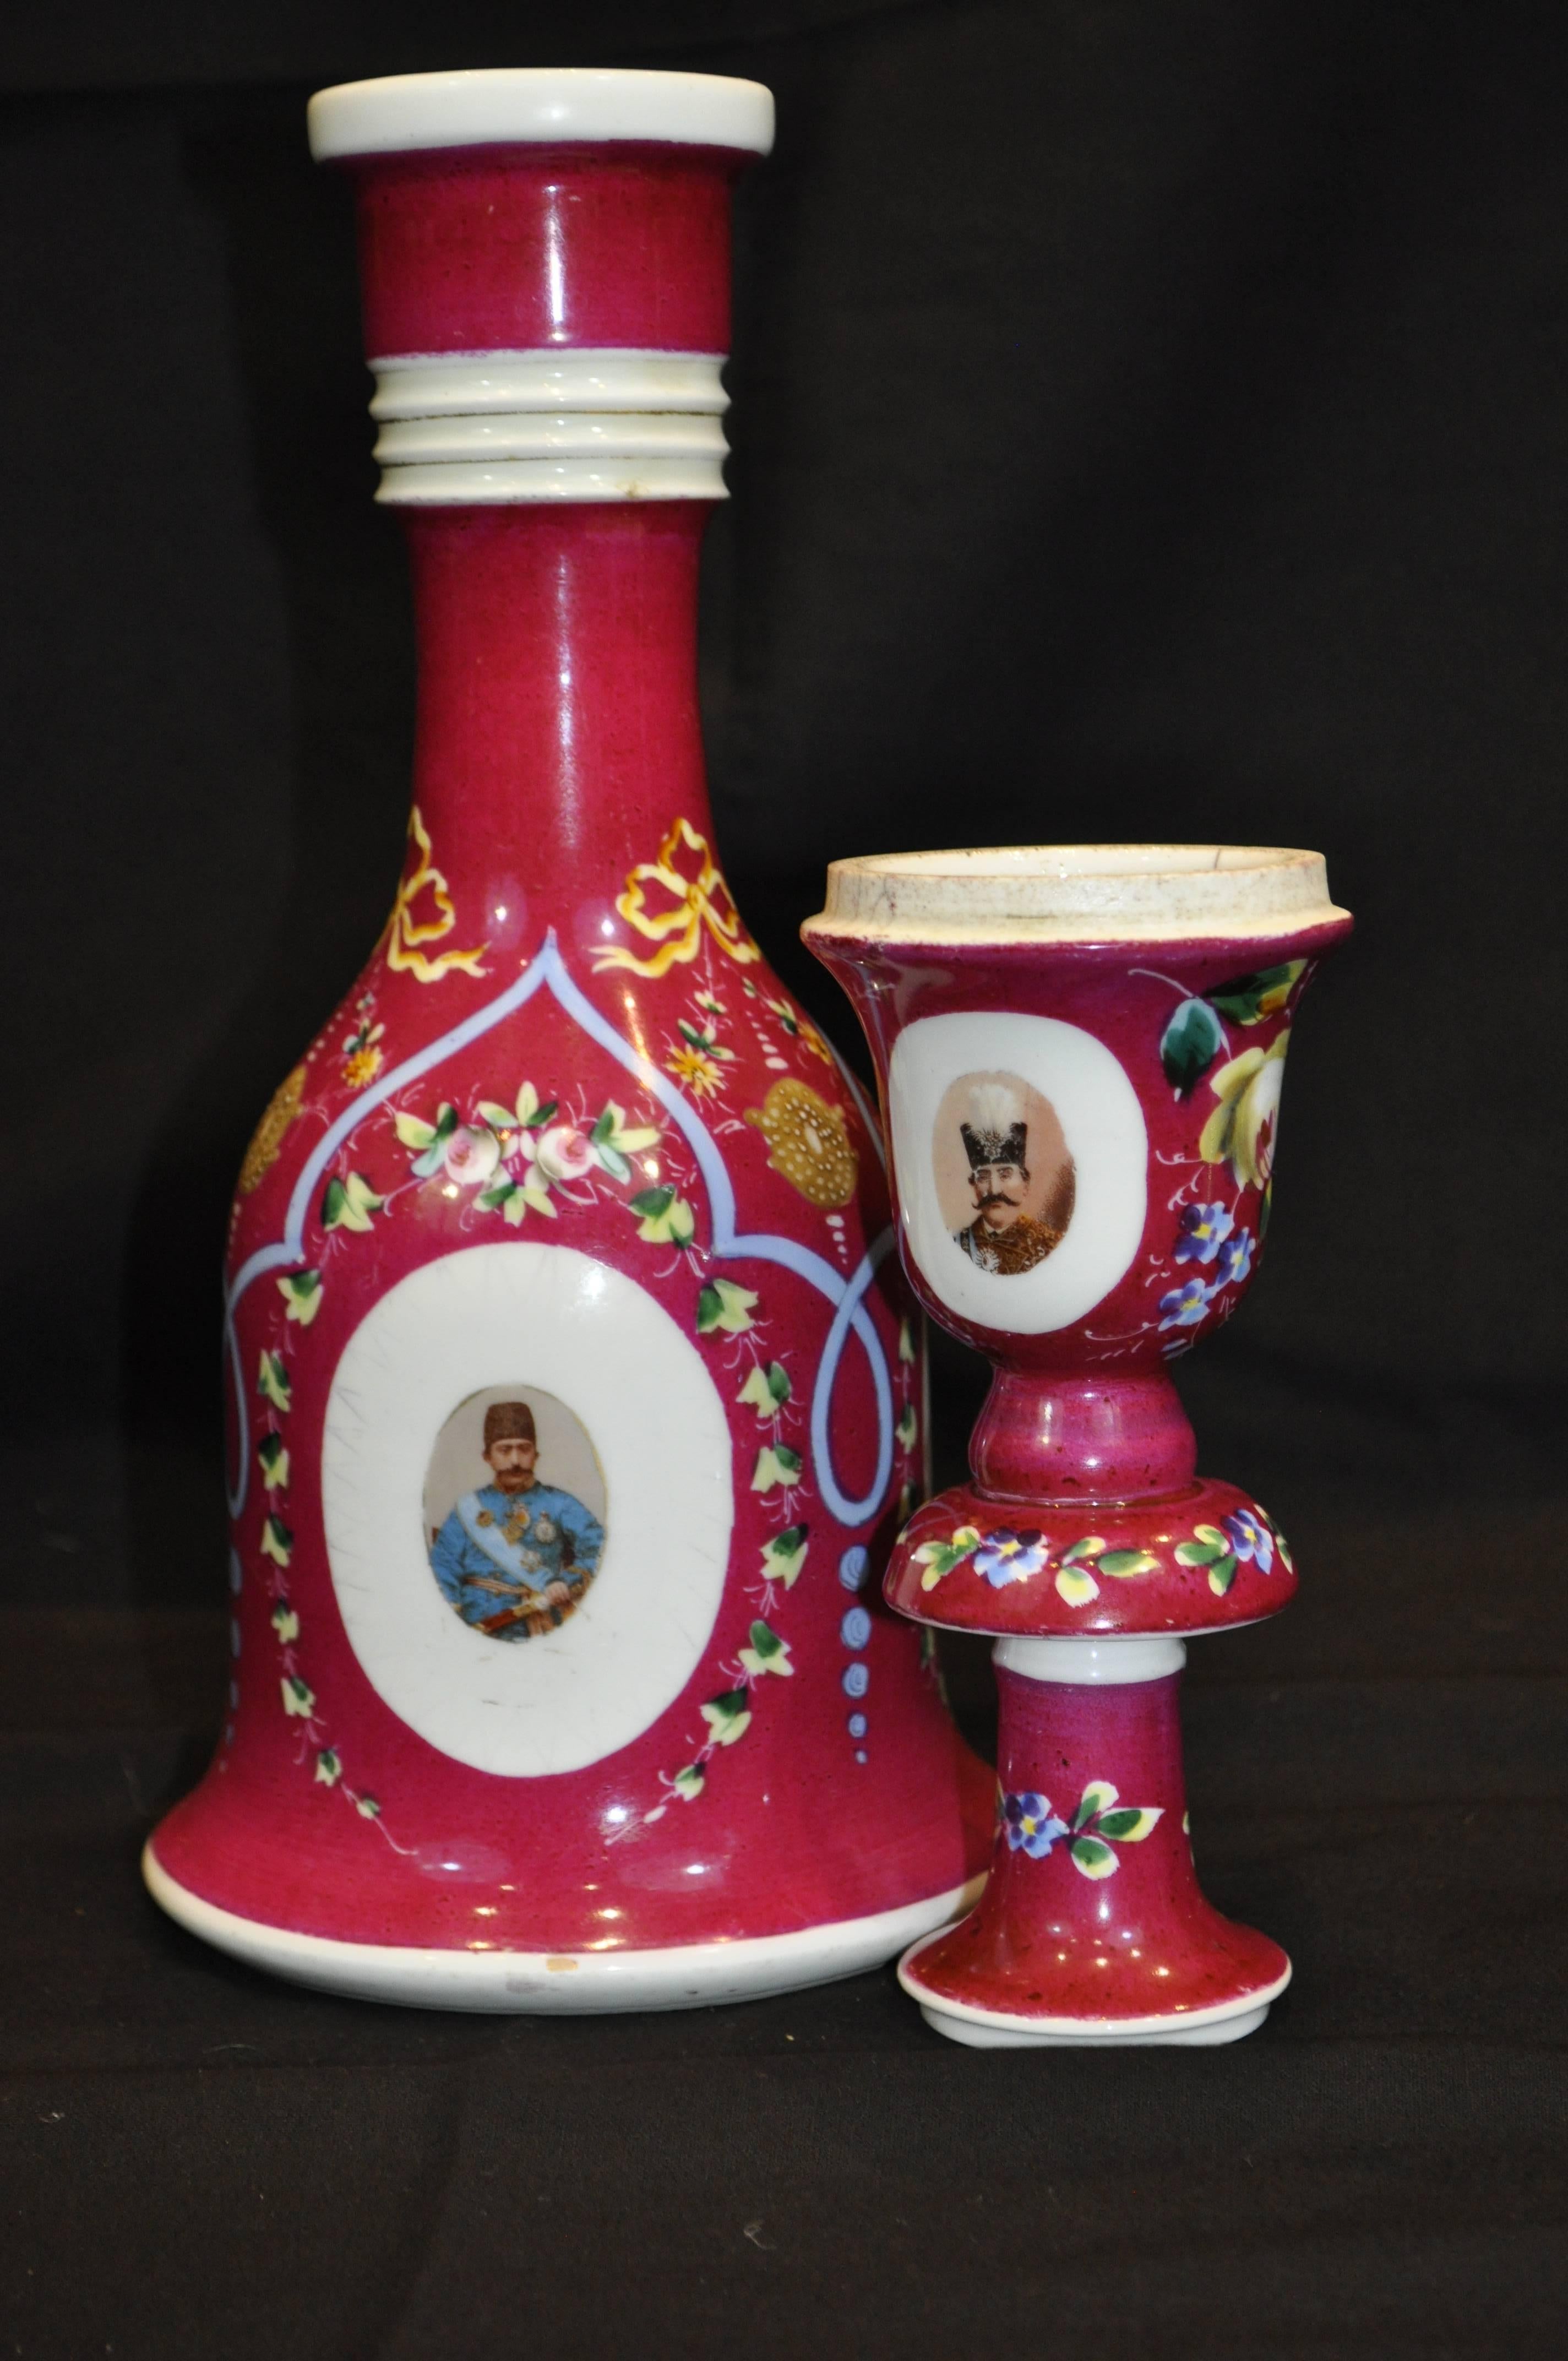 A group of five Bohemian ceramic nargileh (hookah) bases with their cups featuring medallions of Eastern Potentates.
They are decorated in colourful foliate and floral motifs. The main colours include blue, bright pink, magenta, yellow, and orange.